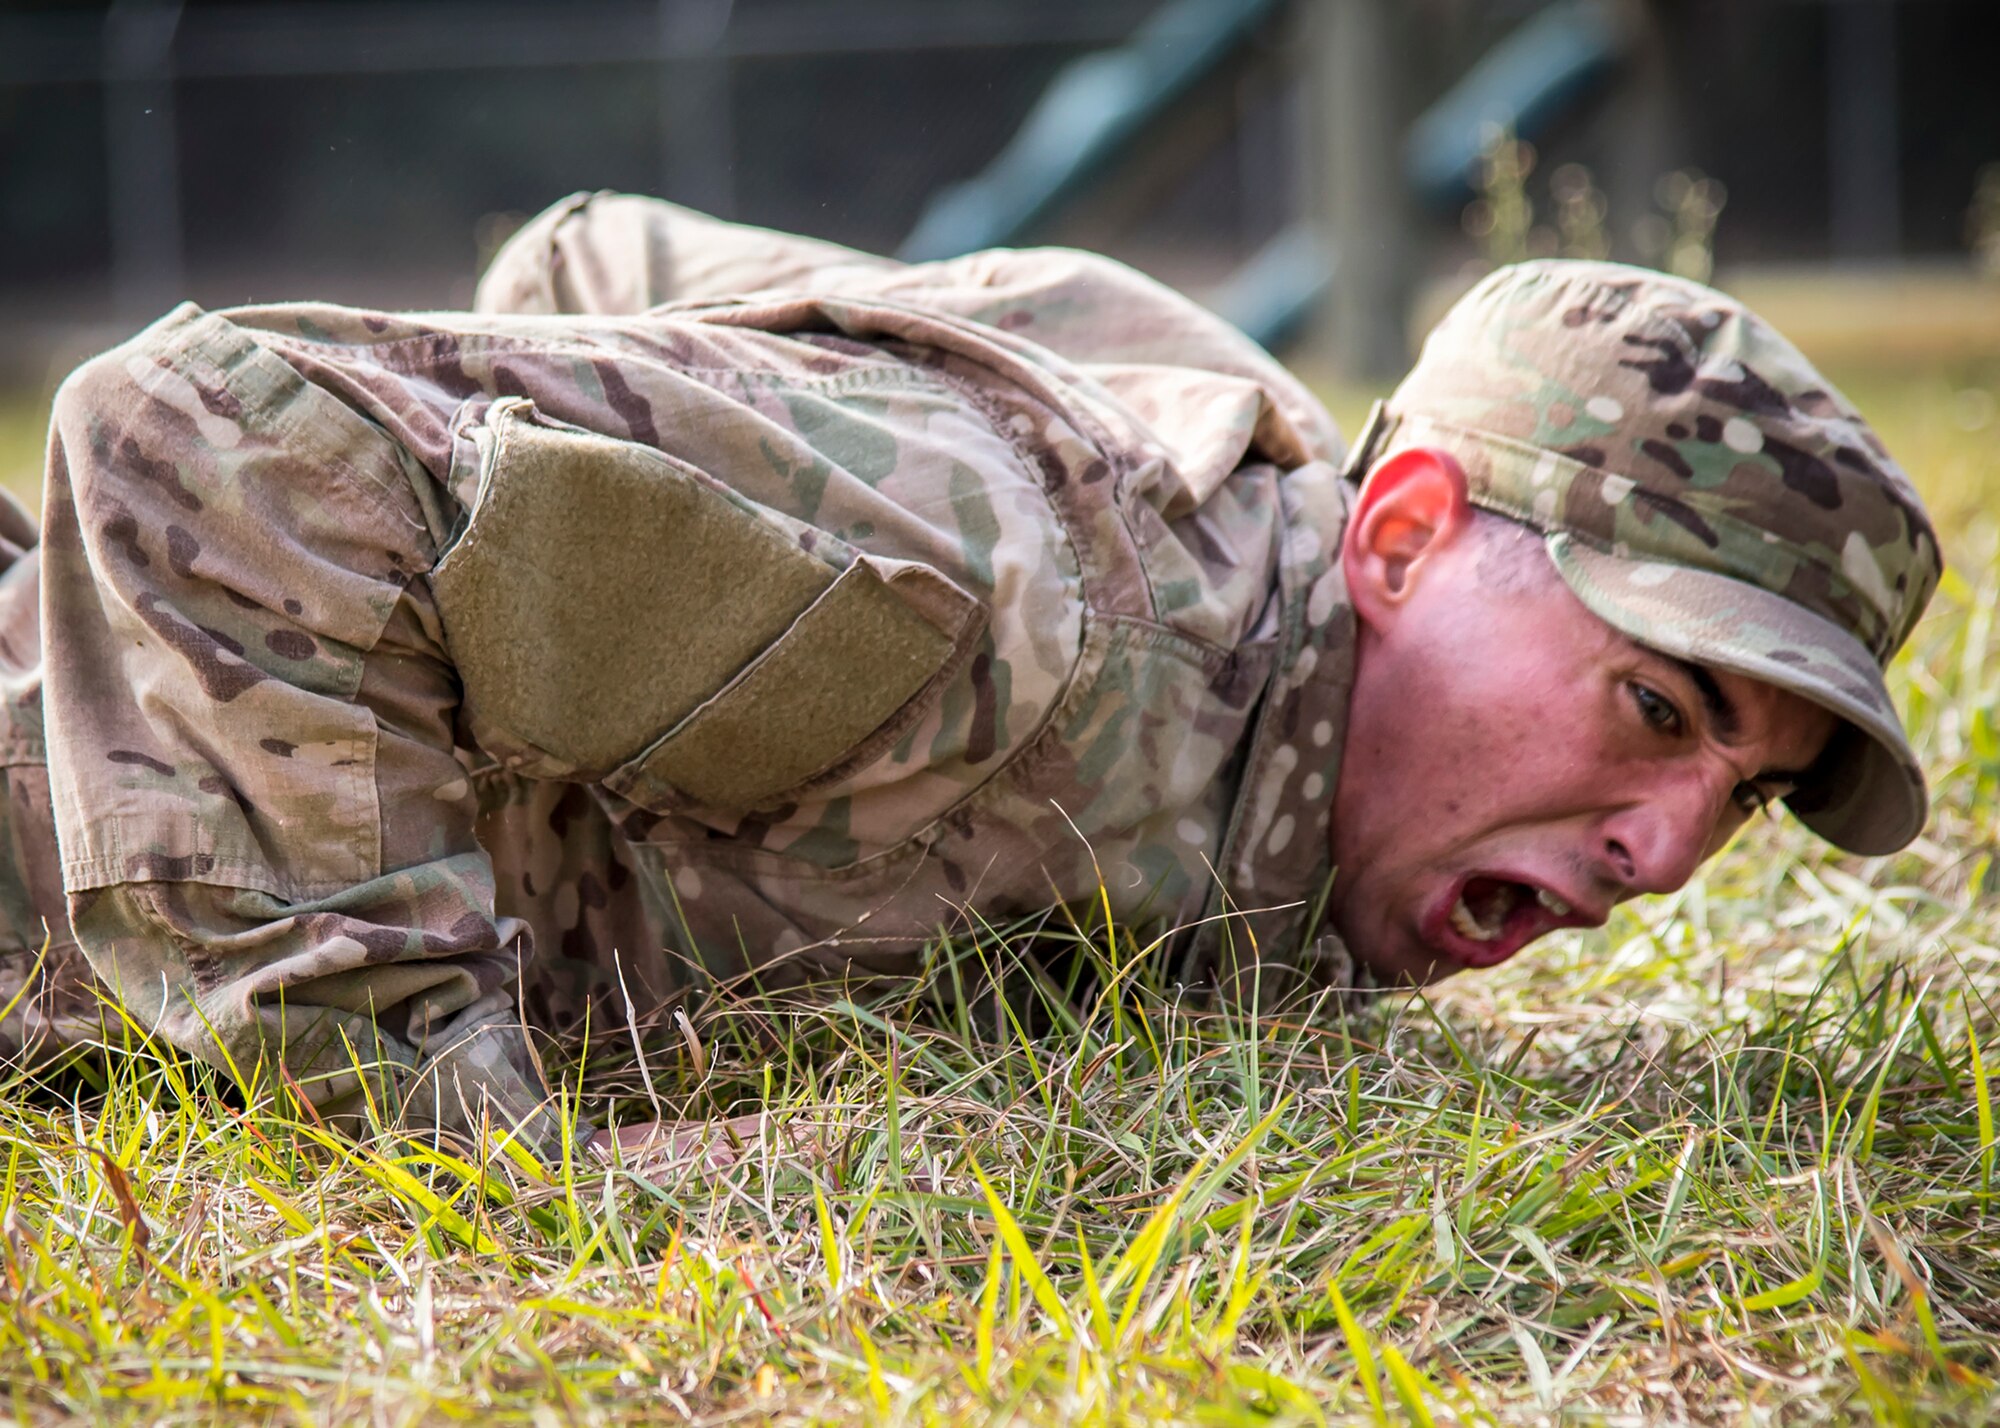 Staff Sgt. Ethan Martin, 23d Security Forces Squadron reports and analysis clerk, calls out commands prior to performing a push-up during an Army Air Assault Assessment (AAA), Jan. 30, 2019, at Camp Blanding, Fla. The AAA is designed to determine Airmen’s physical and mental readiness before being selected to attend Army Air Assault school. (U.S. Air Force photo by Airman First Class Eugene Oliver)